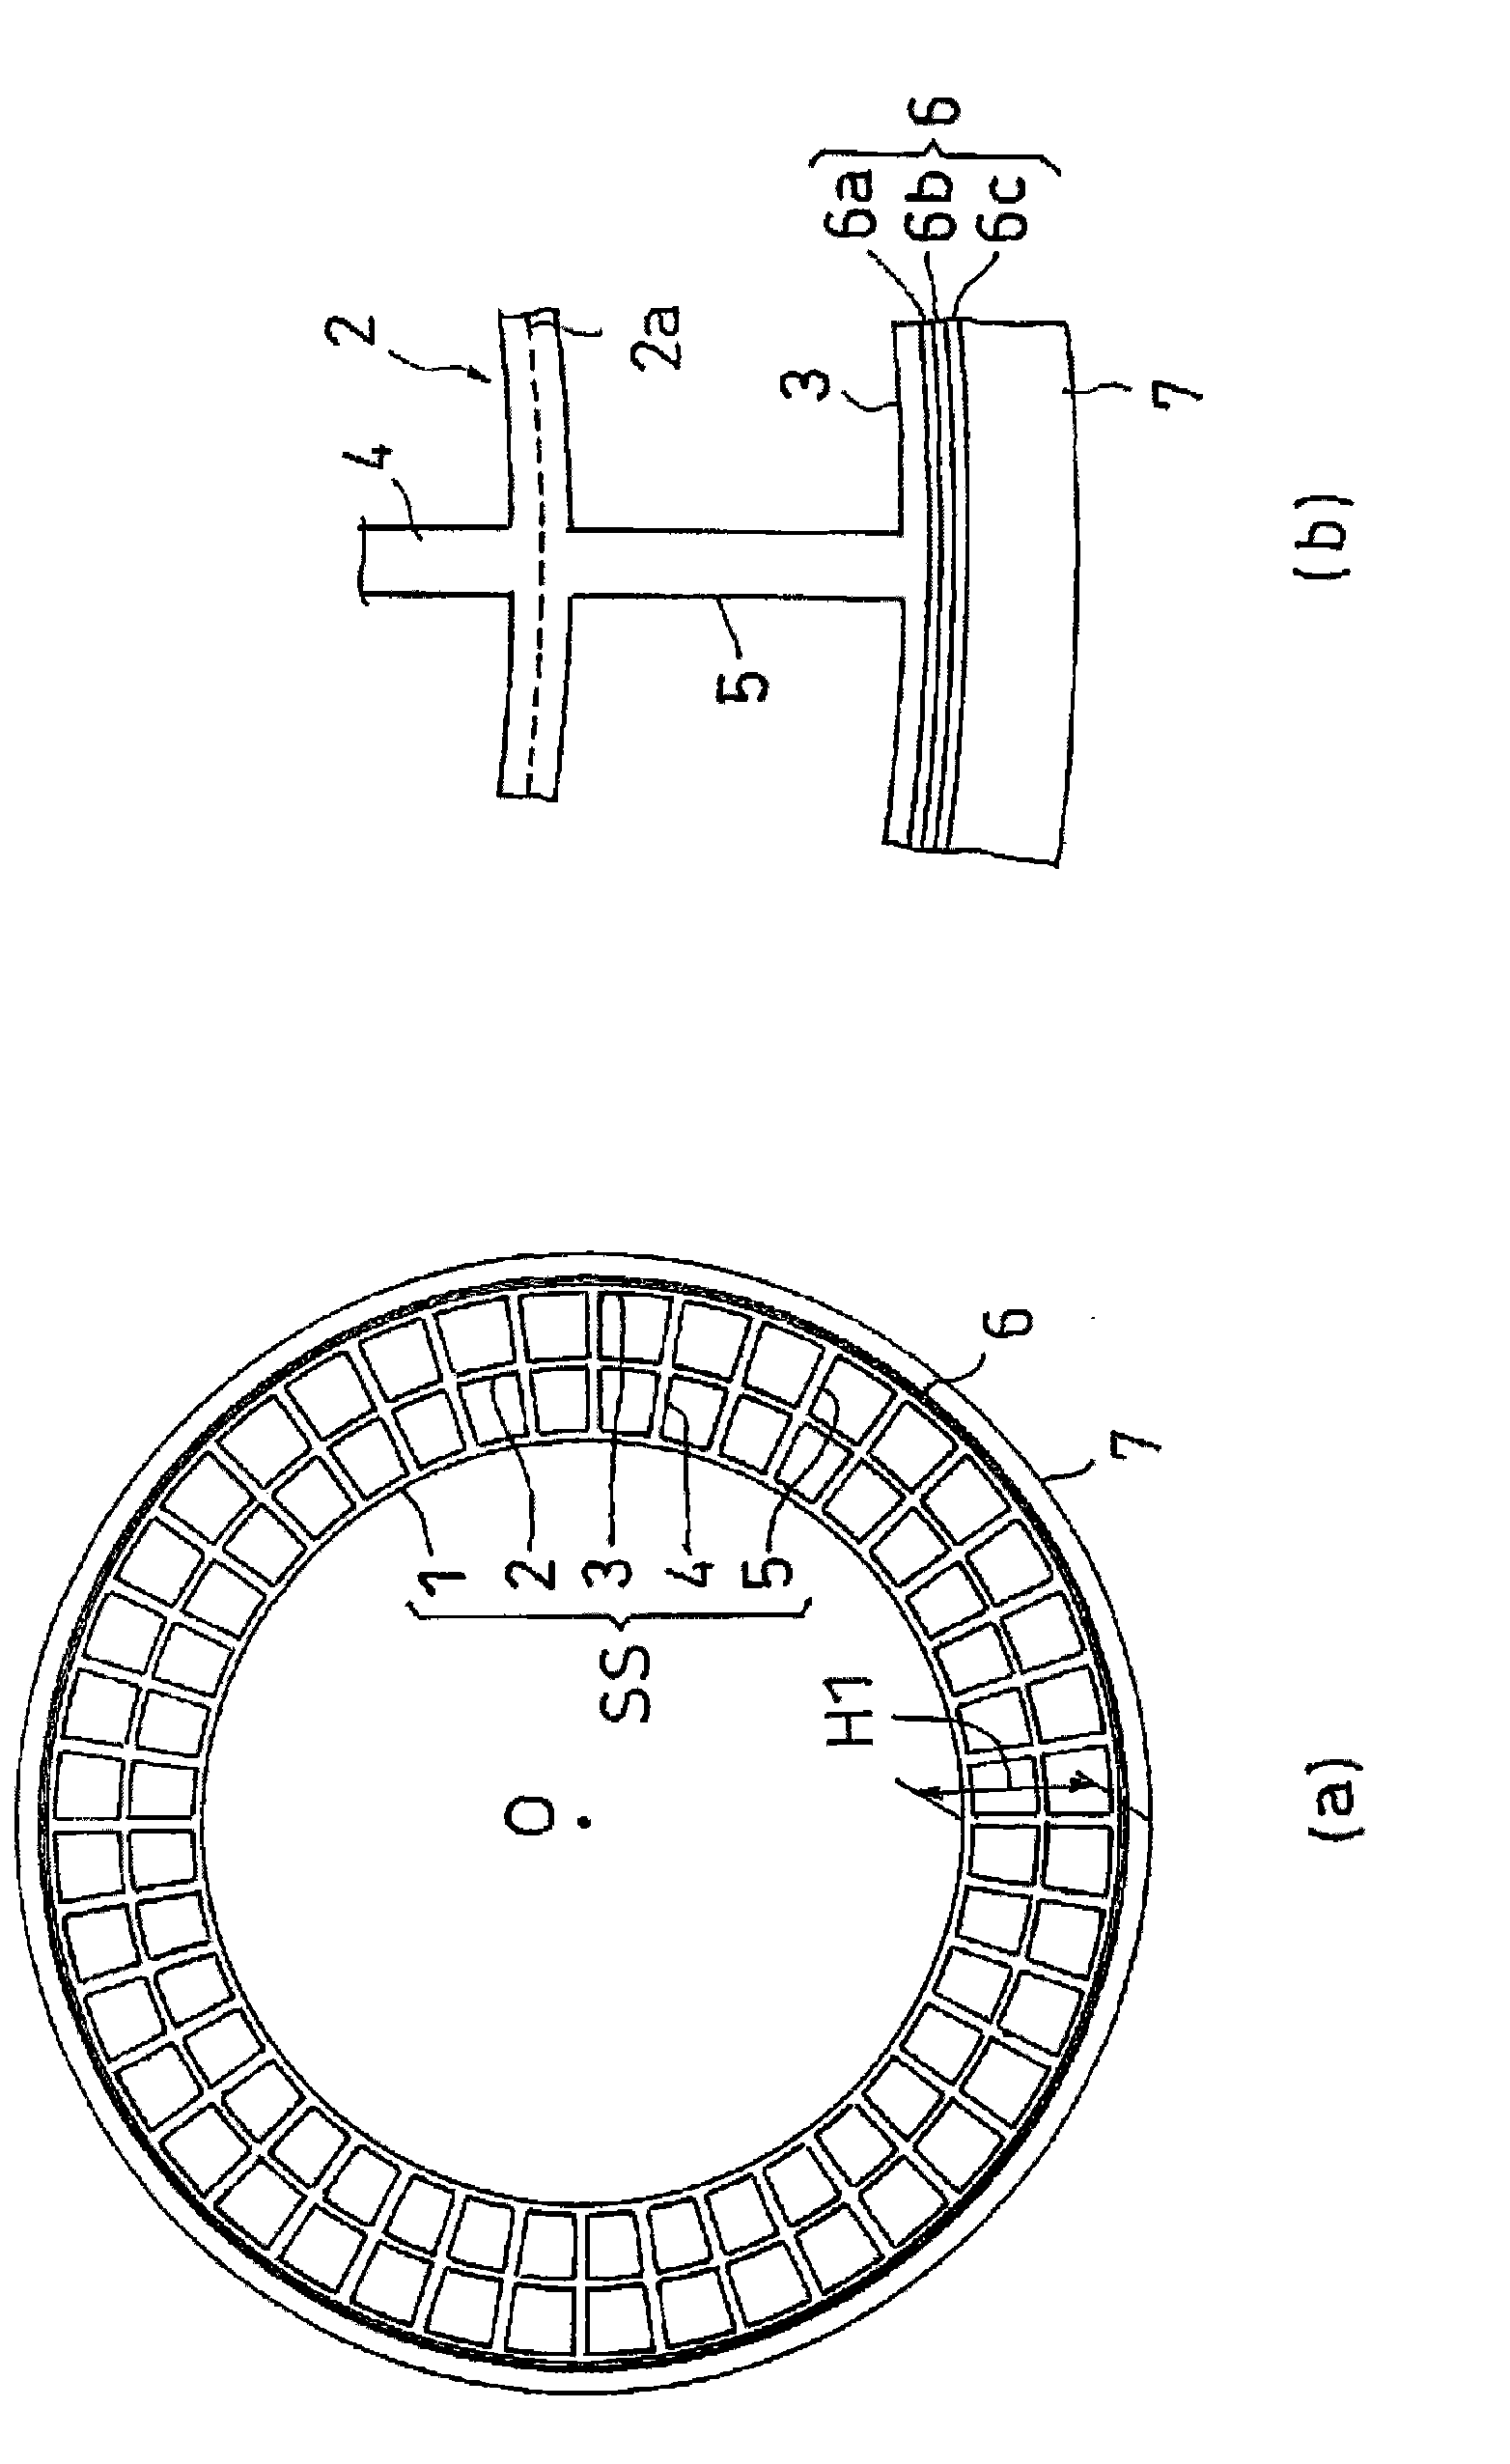 Non-pneumatic tire, and its manufacturing method